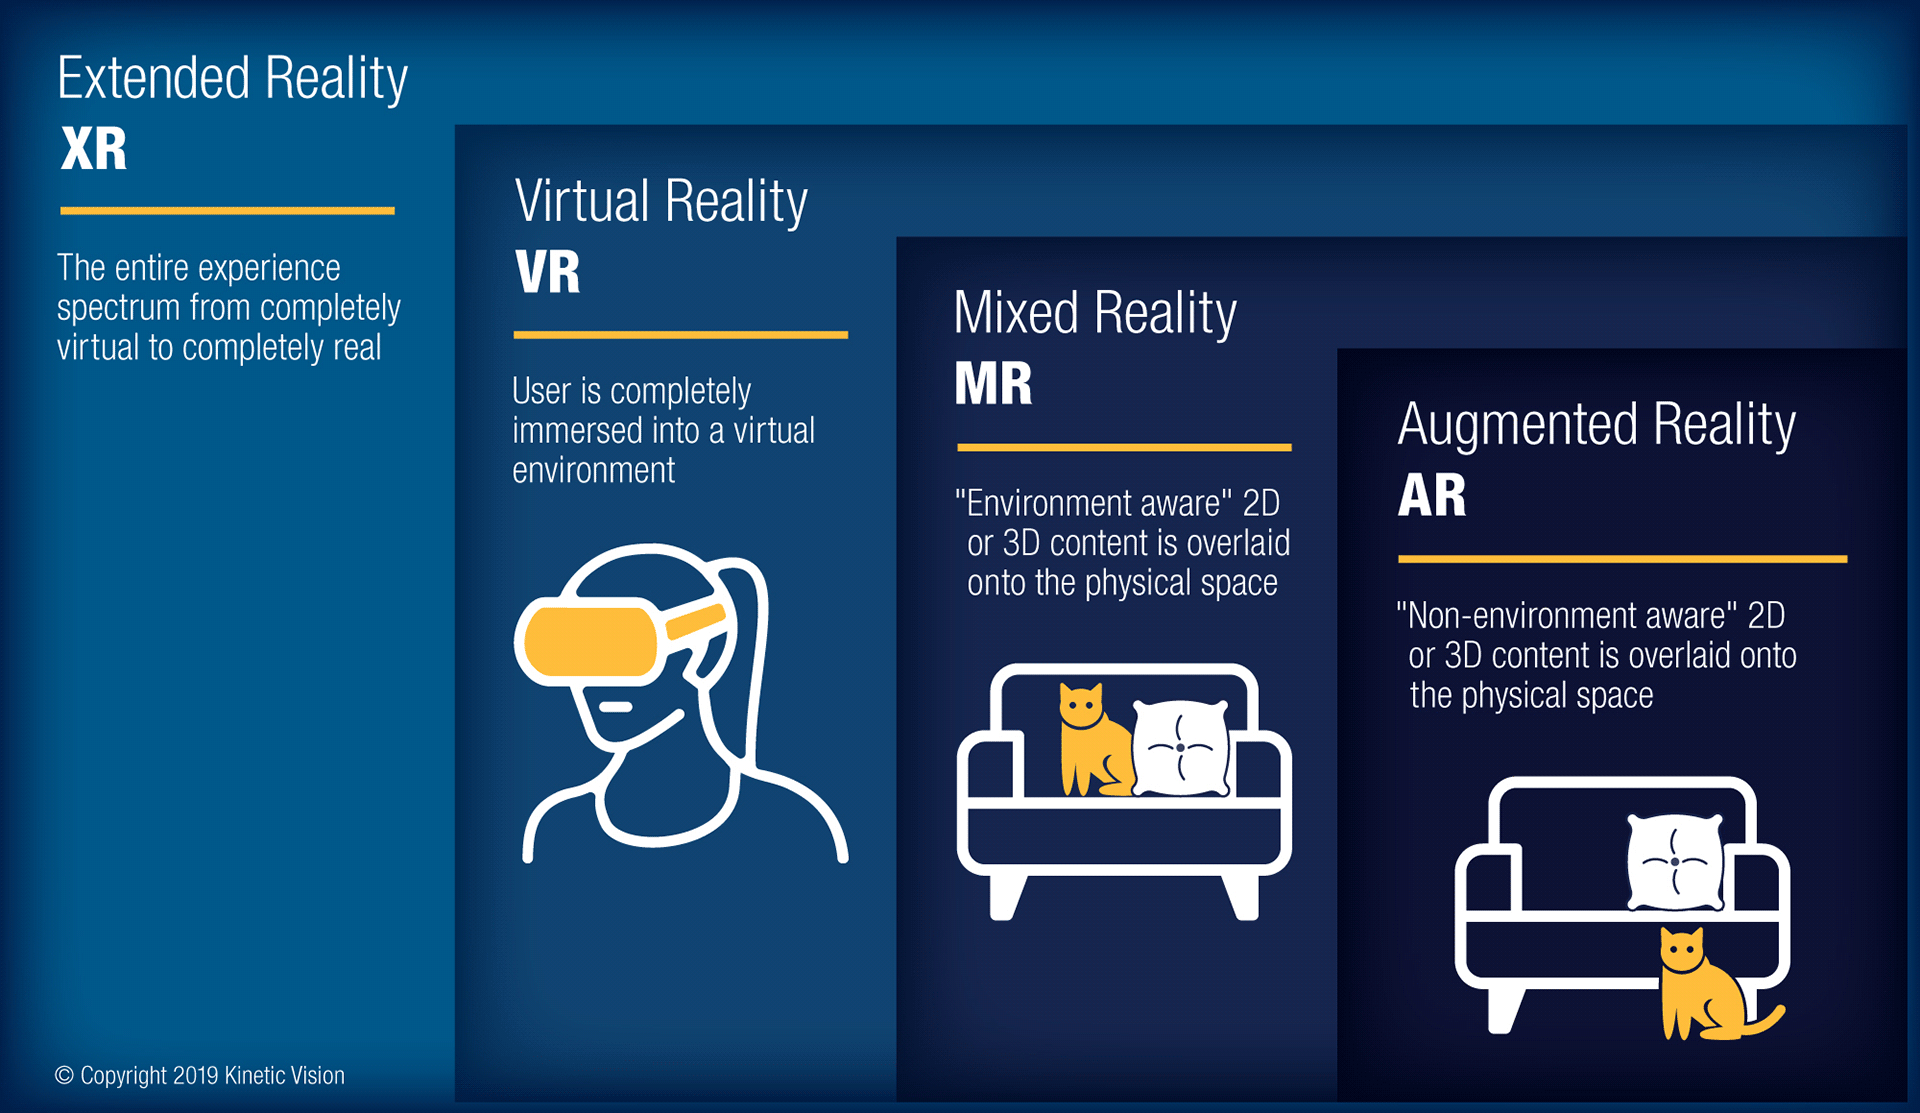 Infographic comparing XR, VR, MR and AR